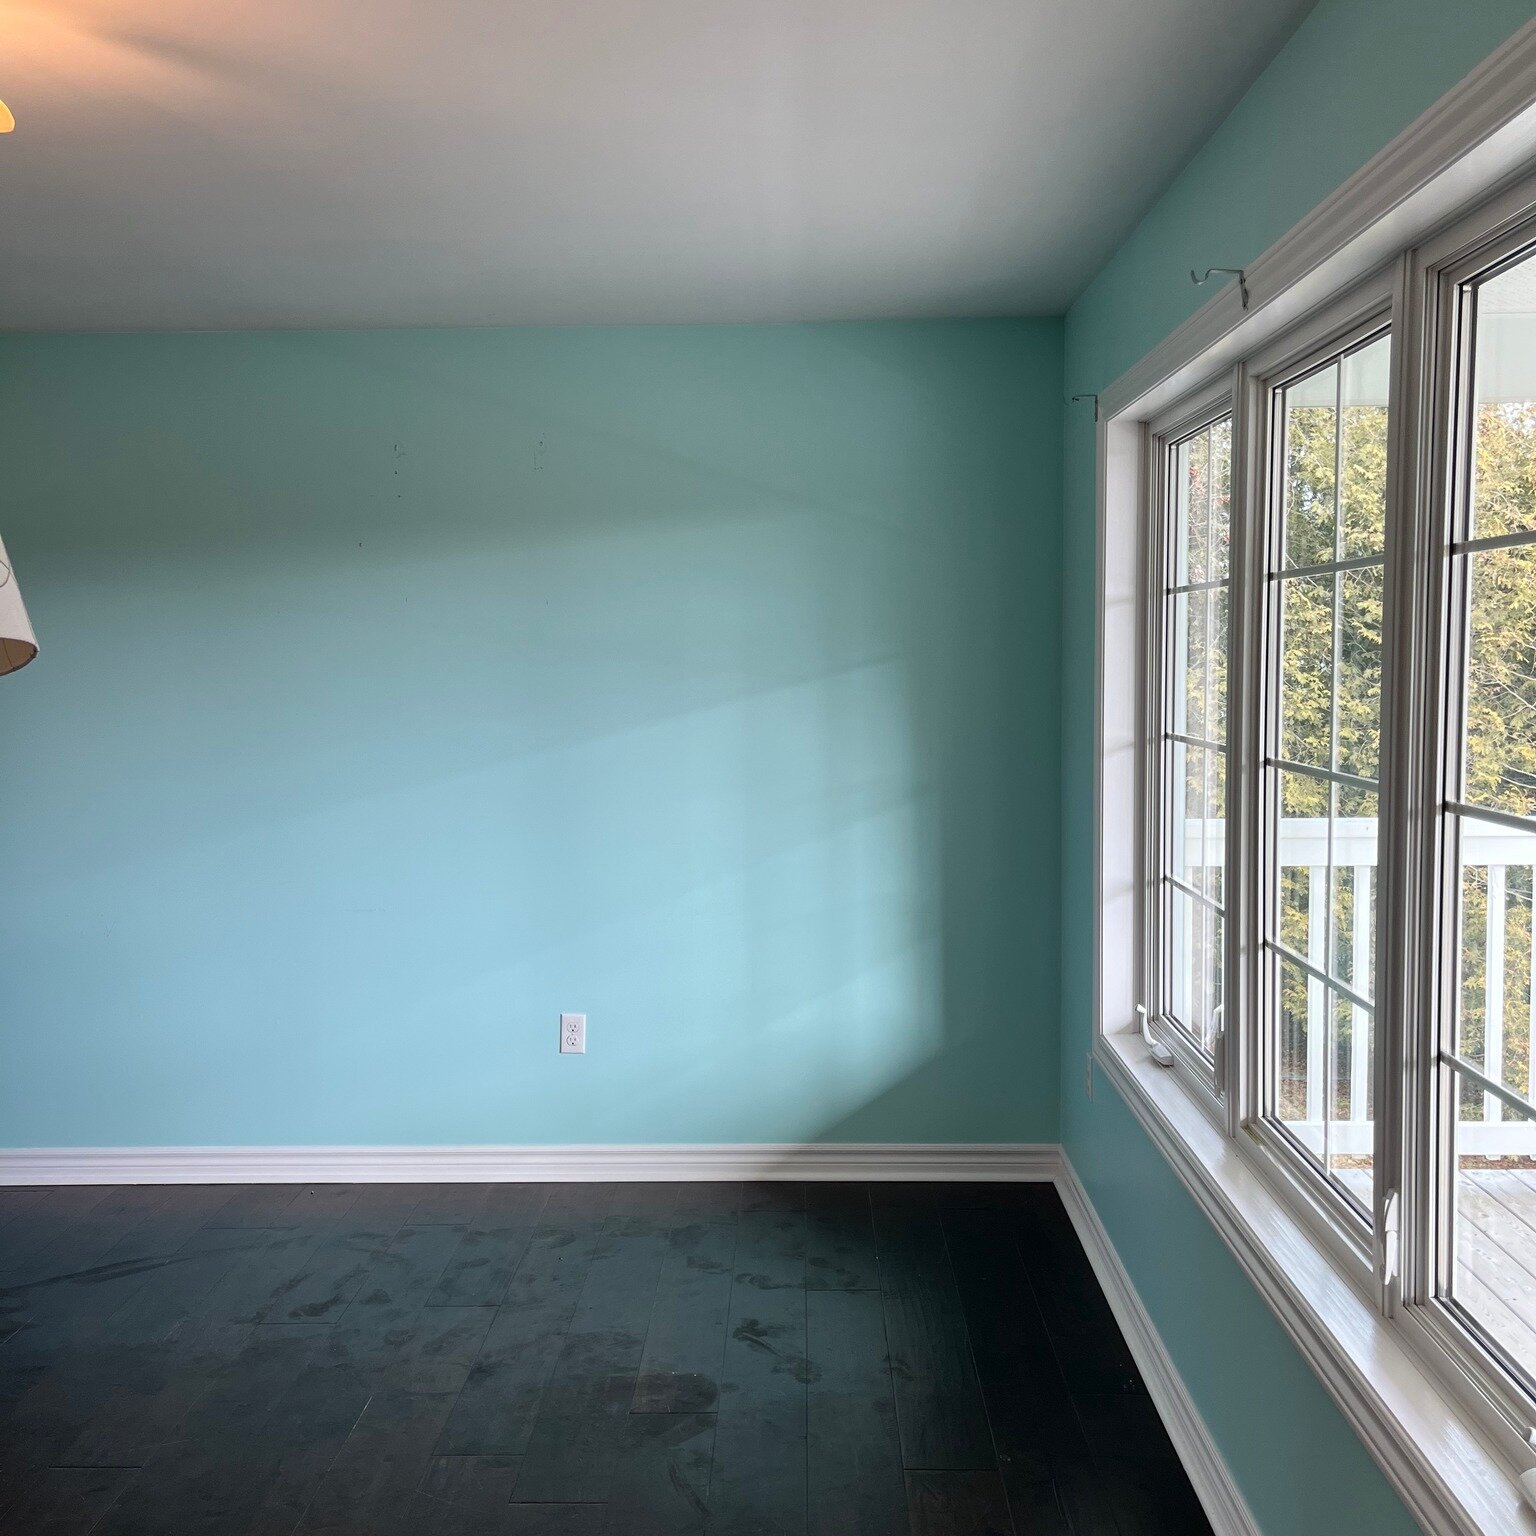 I love that colour is so personal! What was bright and joyful for one owner was overwhelming for the next. Let us help make your space reflect your personality! #choosingpaint #interiordesign #orangeville #orangevillepainters